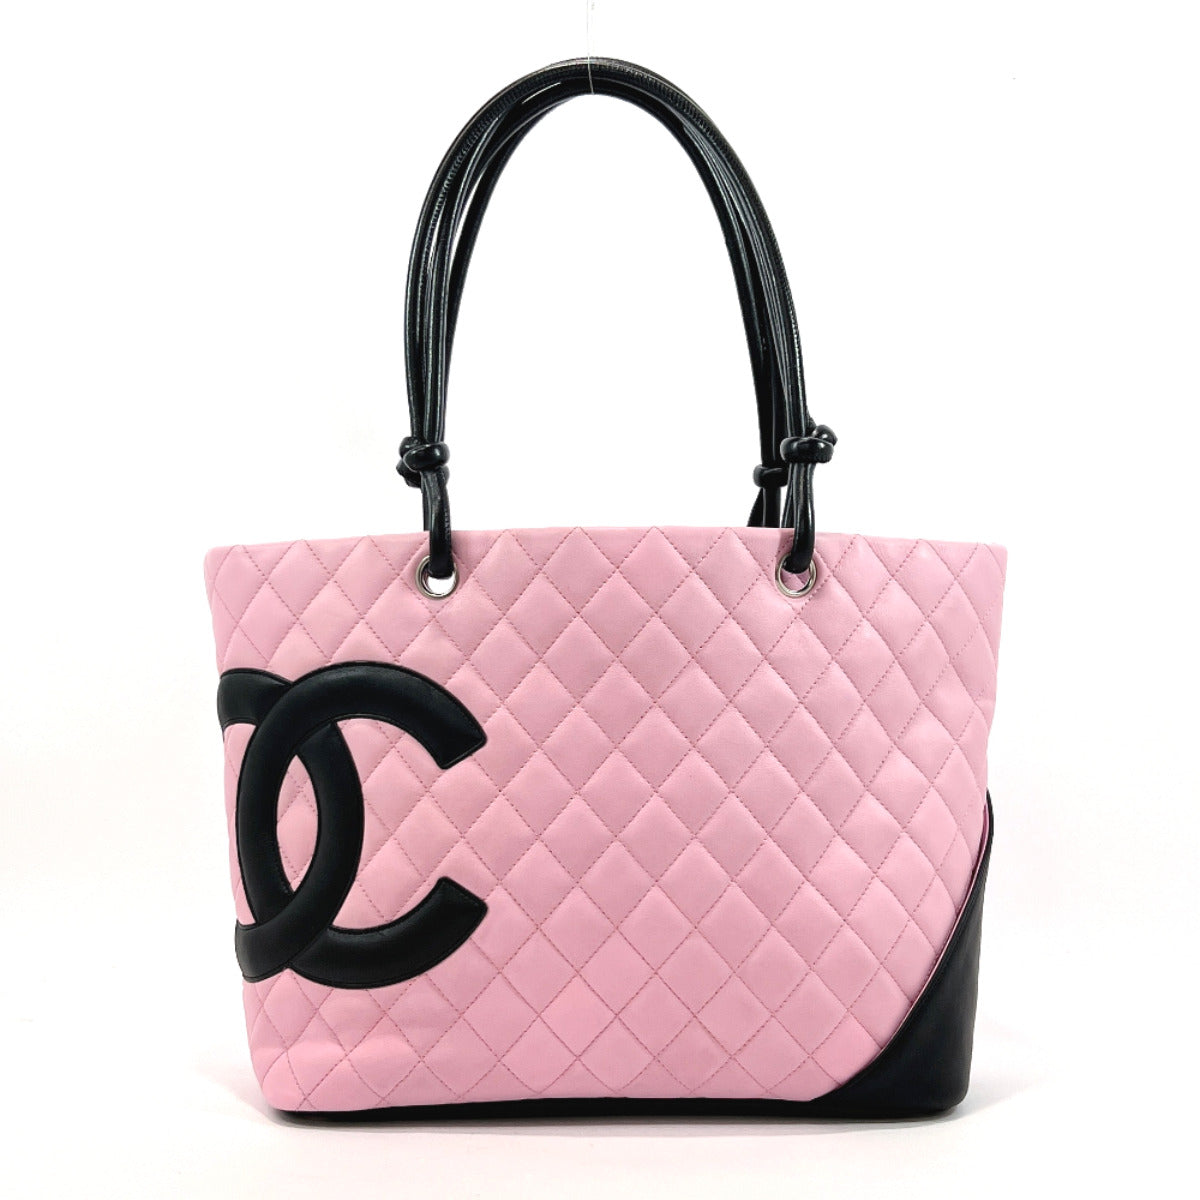 Snag the Latest CHANEL CHANEL Cambon Small Bags & Handbags for Women with  Fast and Free Shipping. Authenticity Guaranteed on Designer Handbags $500+  at .